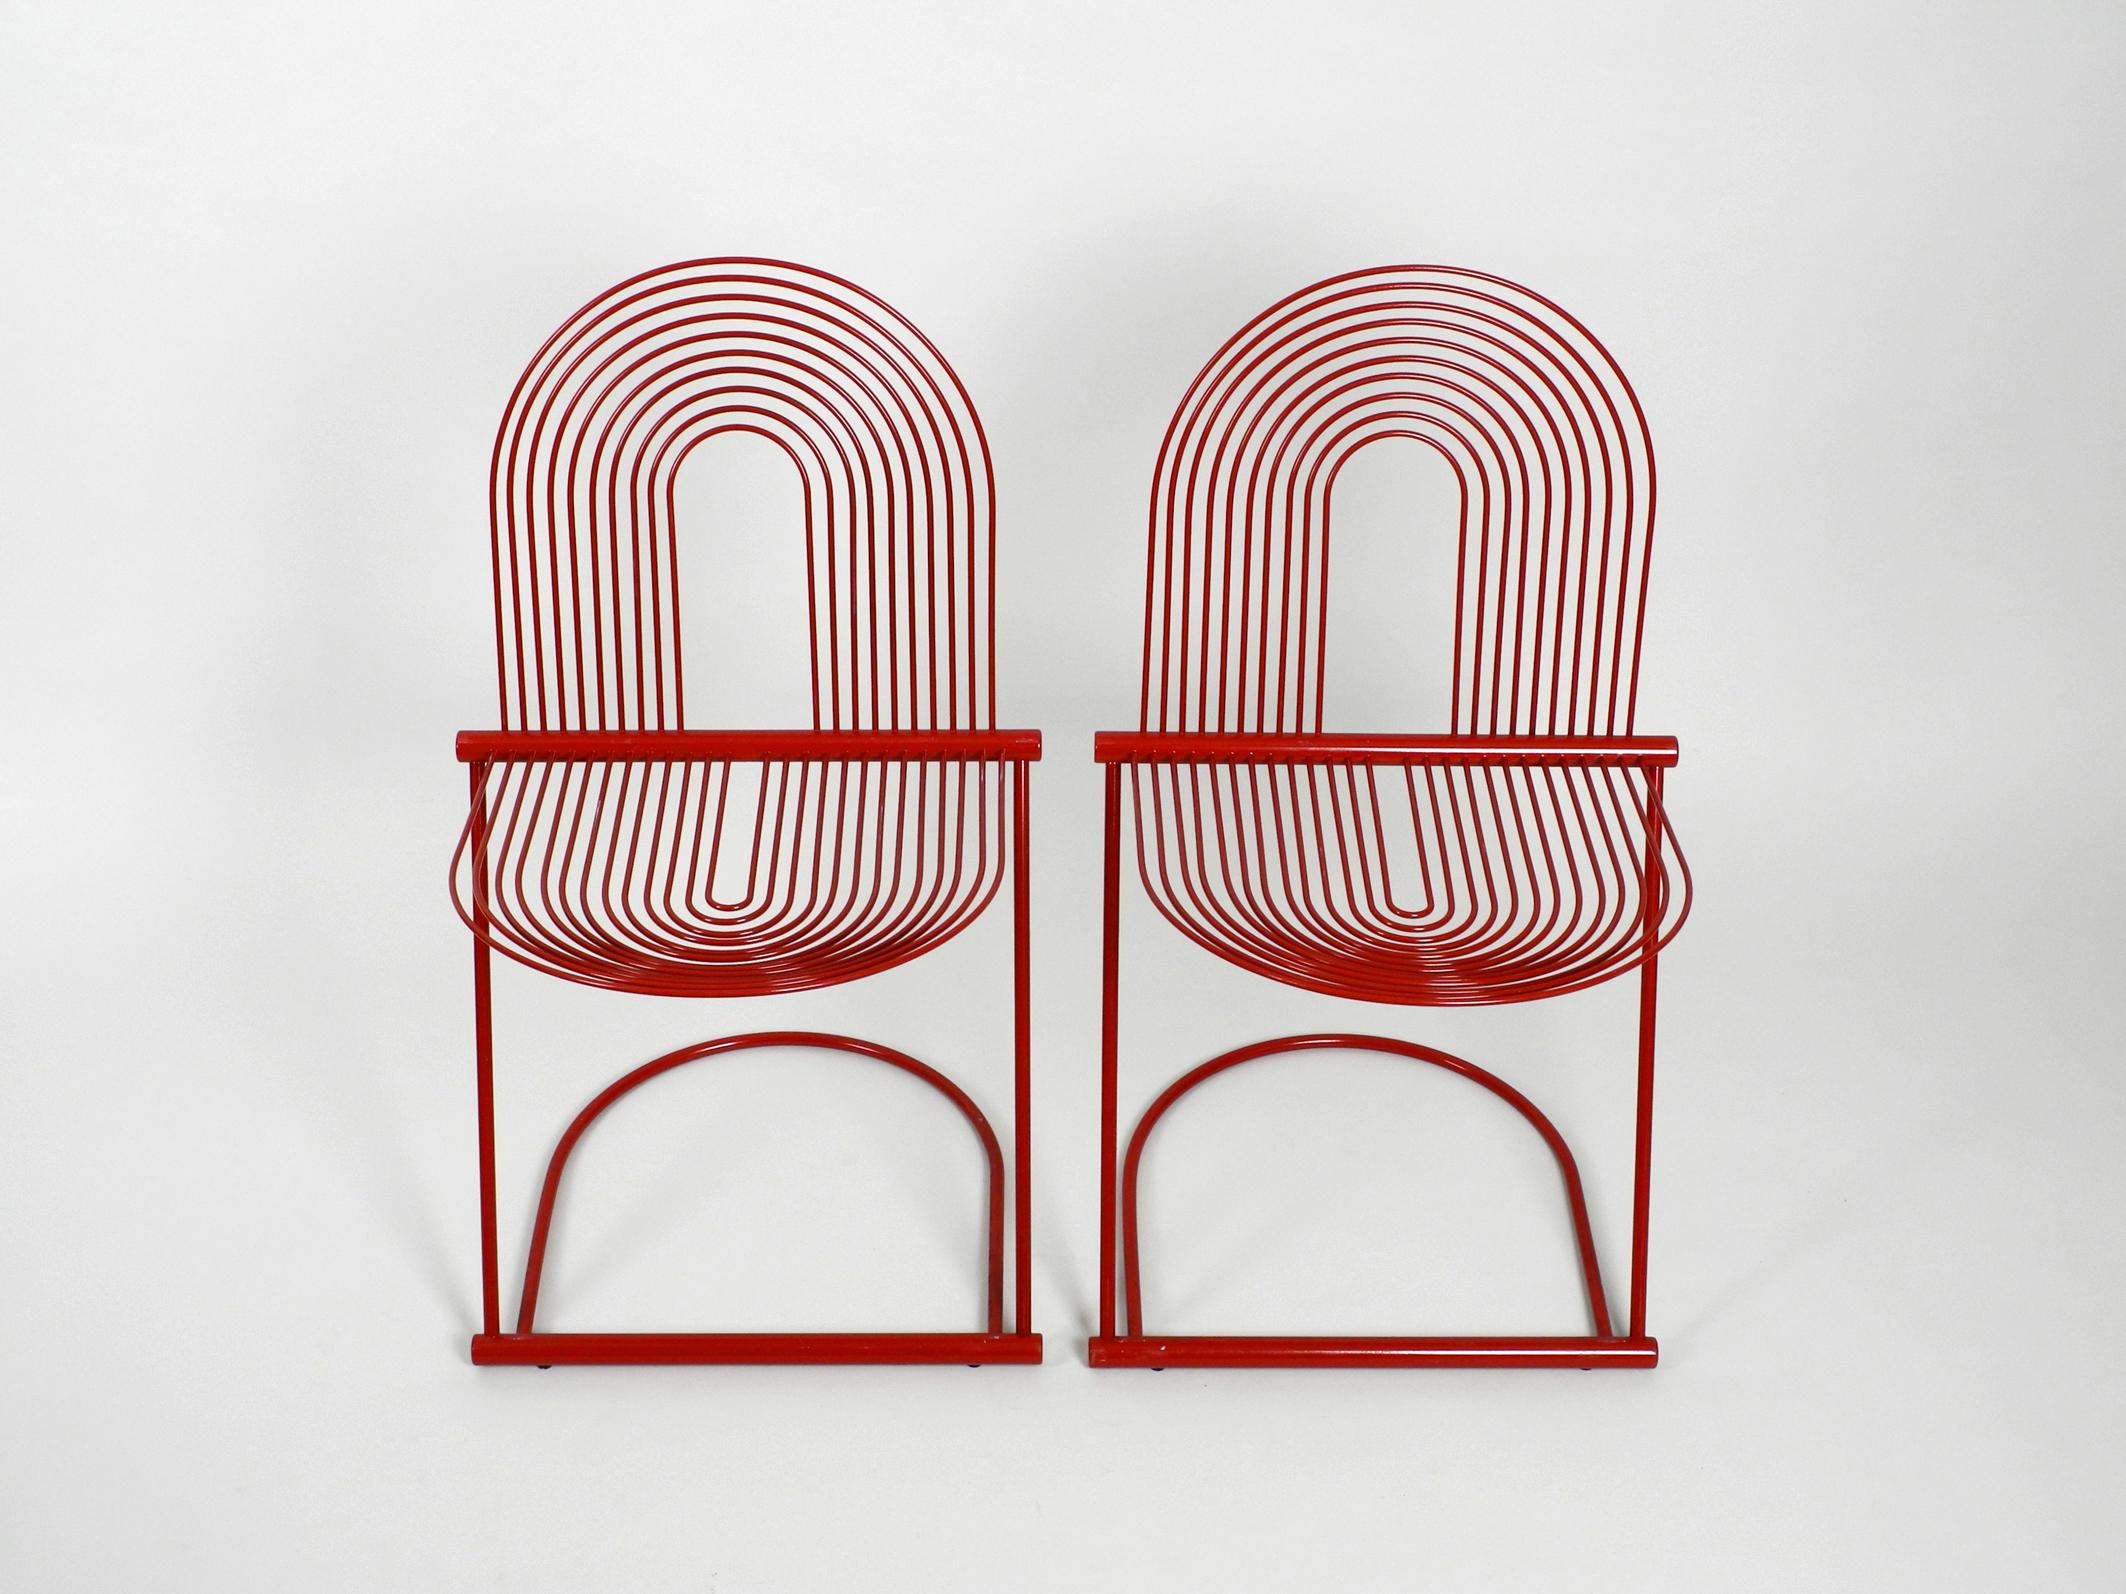 Pair of very rare red swing chairs by Jutta and Herbert Ohl.
From Rosenthal Studio Line. Designed 1982. Made in Germany.
The cantilever chairs are made of red painted spring steel.
In 1982 the designer couple Herbert and Jutta Ohl created the